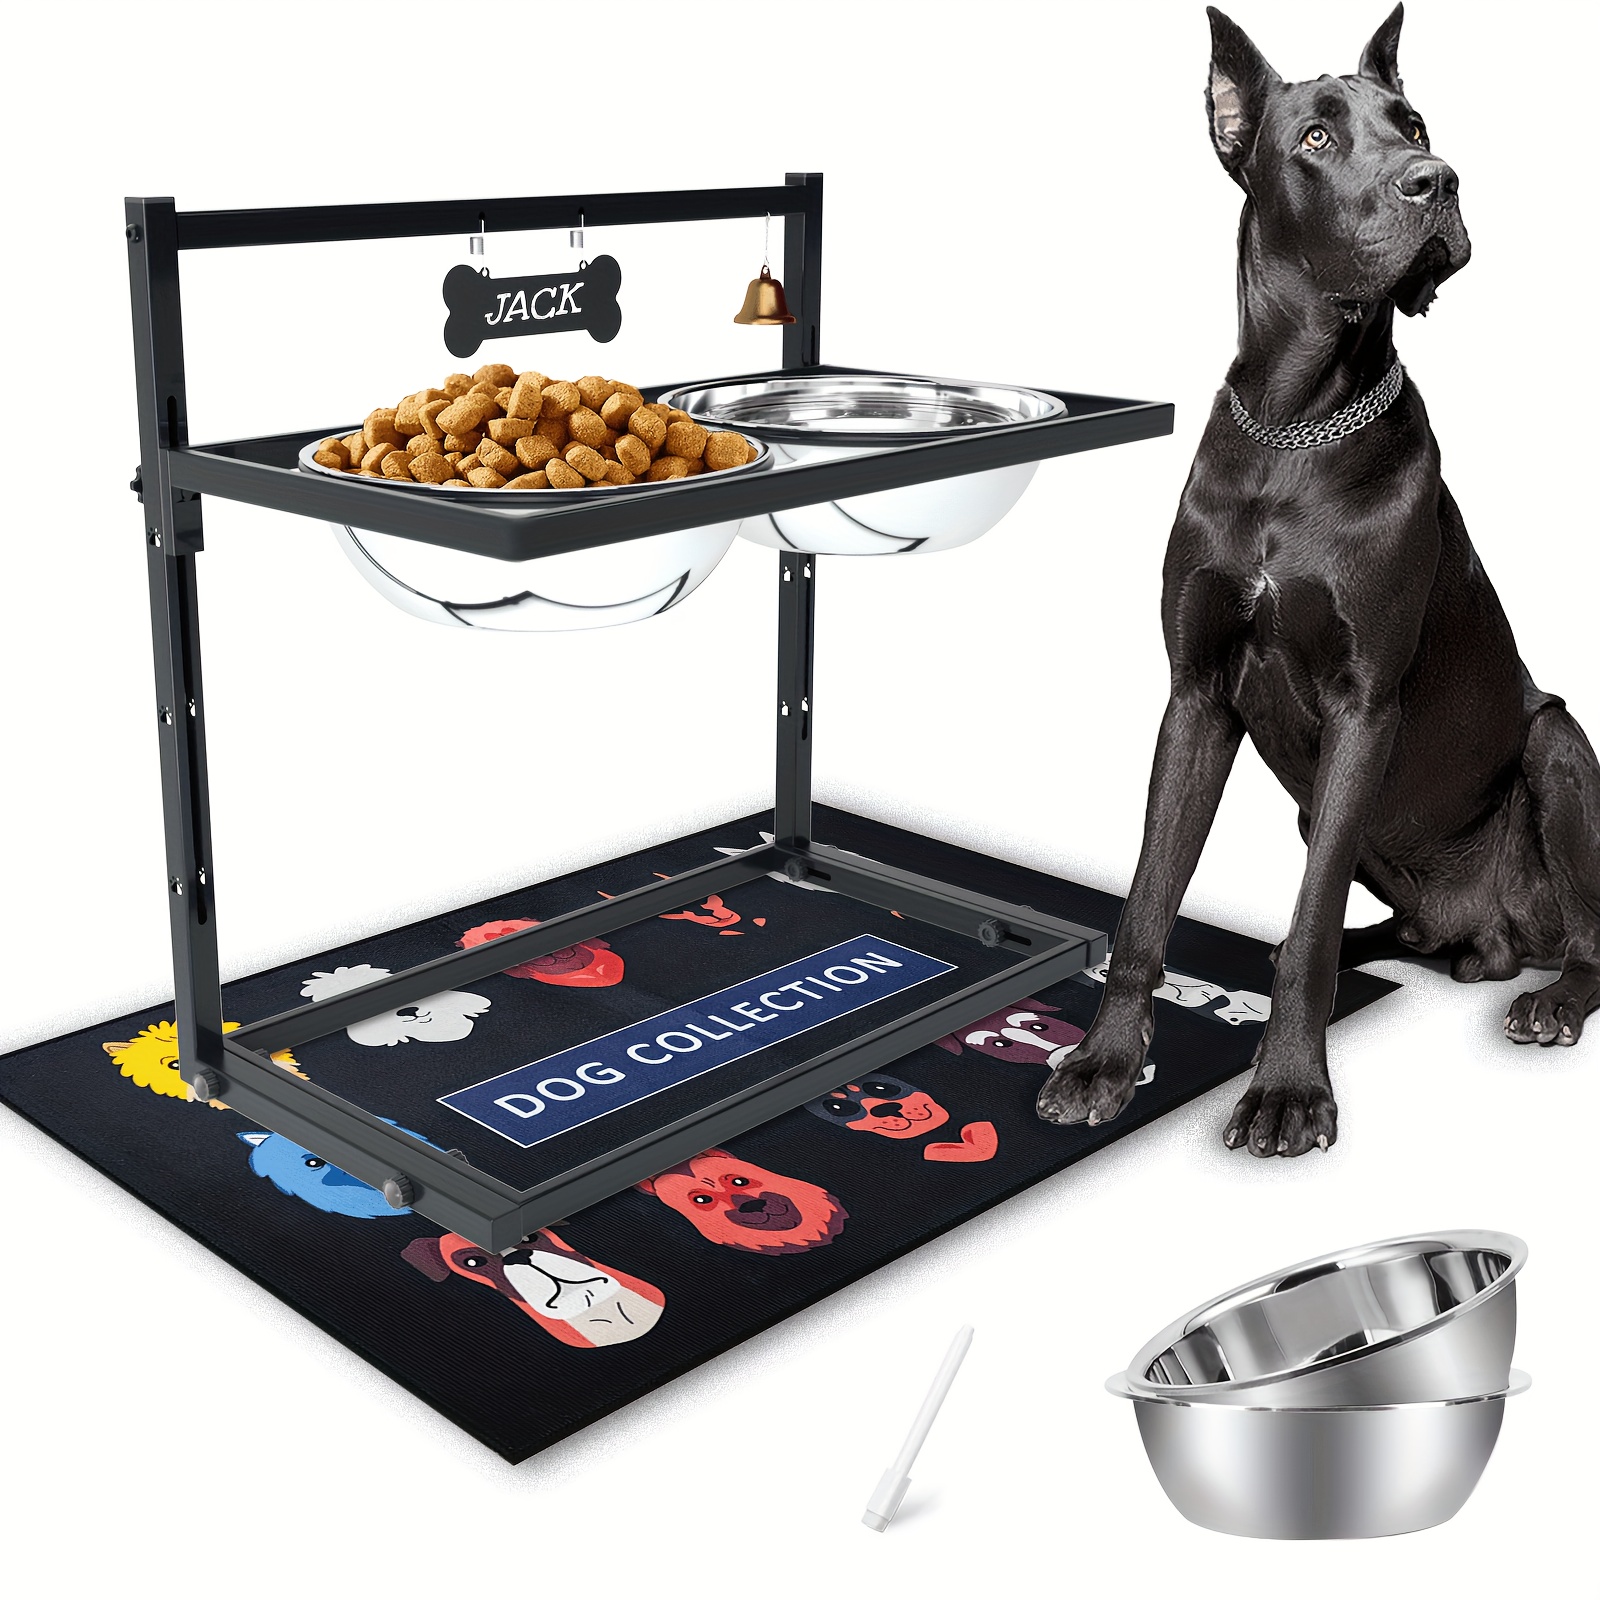 

Elevated Dog Bowls For Large Breeds: Adjustable Height Dog Feeder With 2 3000 Ml Stainless Steel Bowls And Non-slip Mat